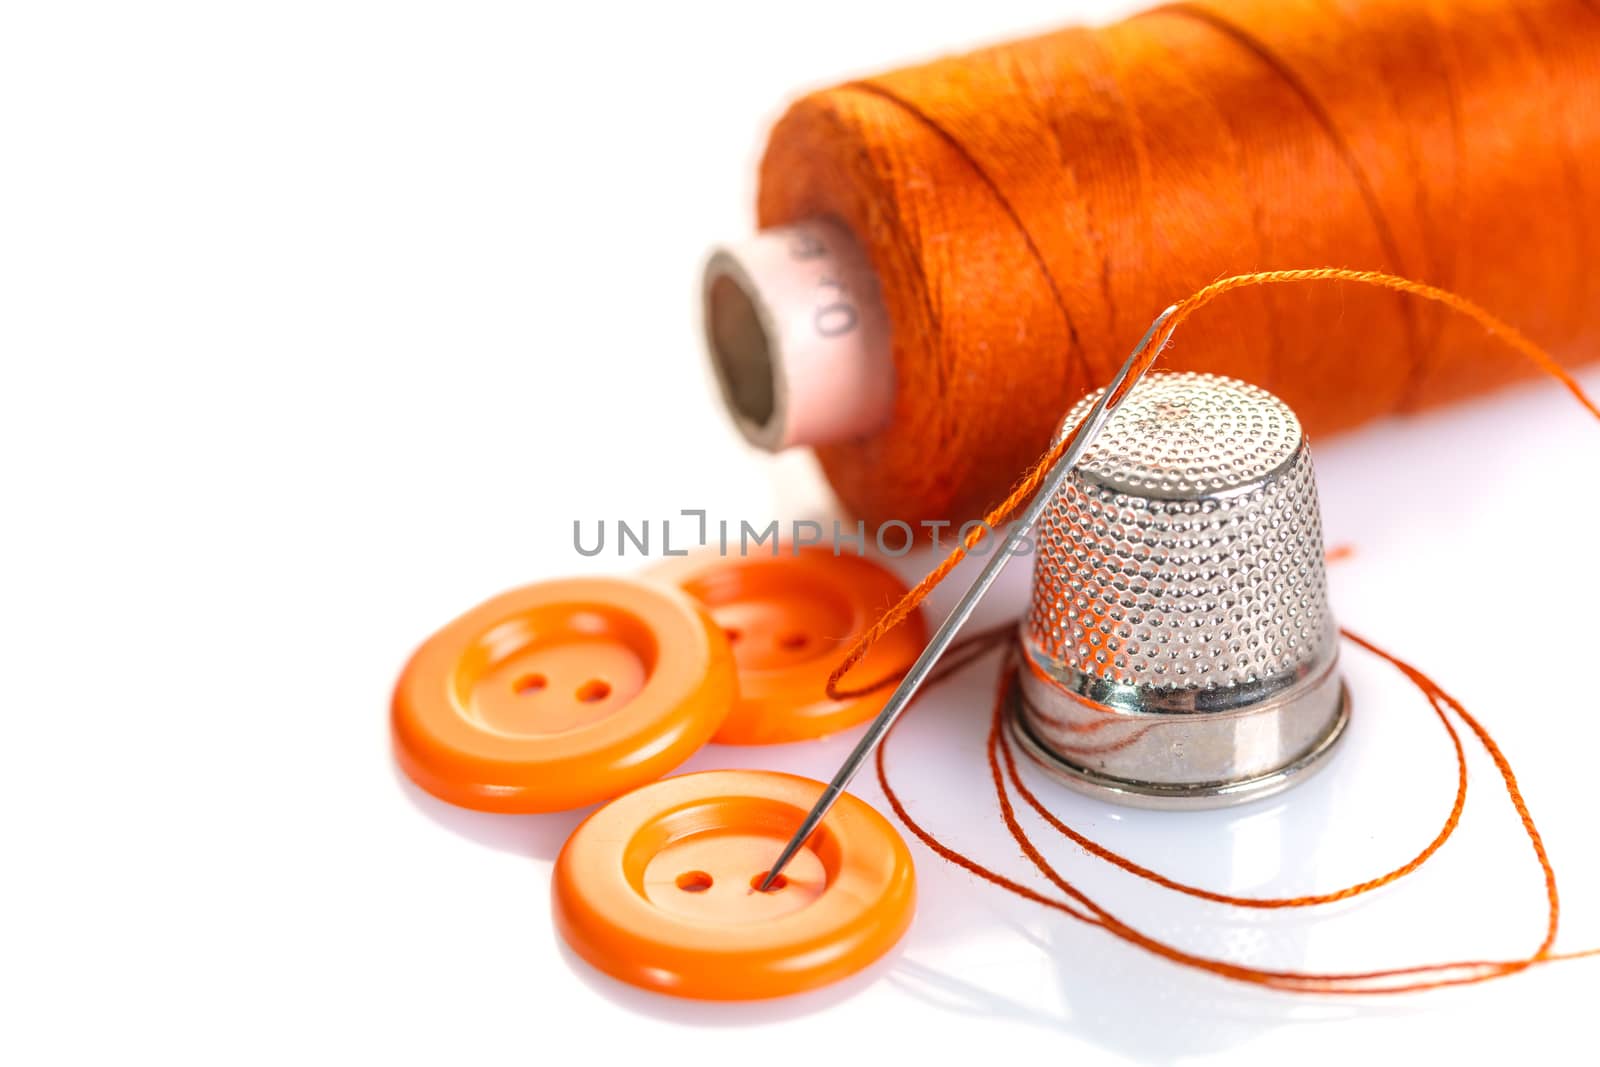 Needle with orange thread and buttons on a white background